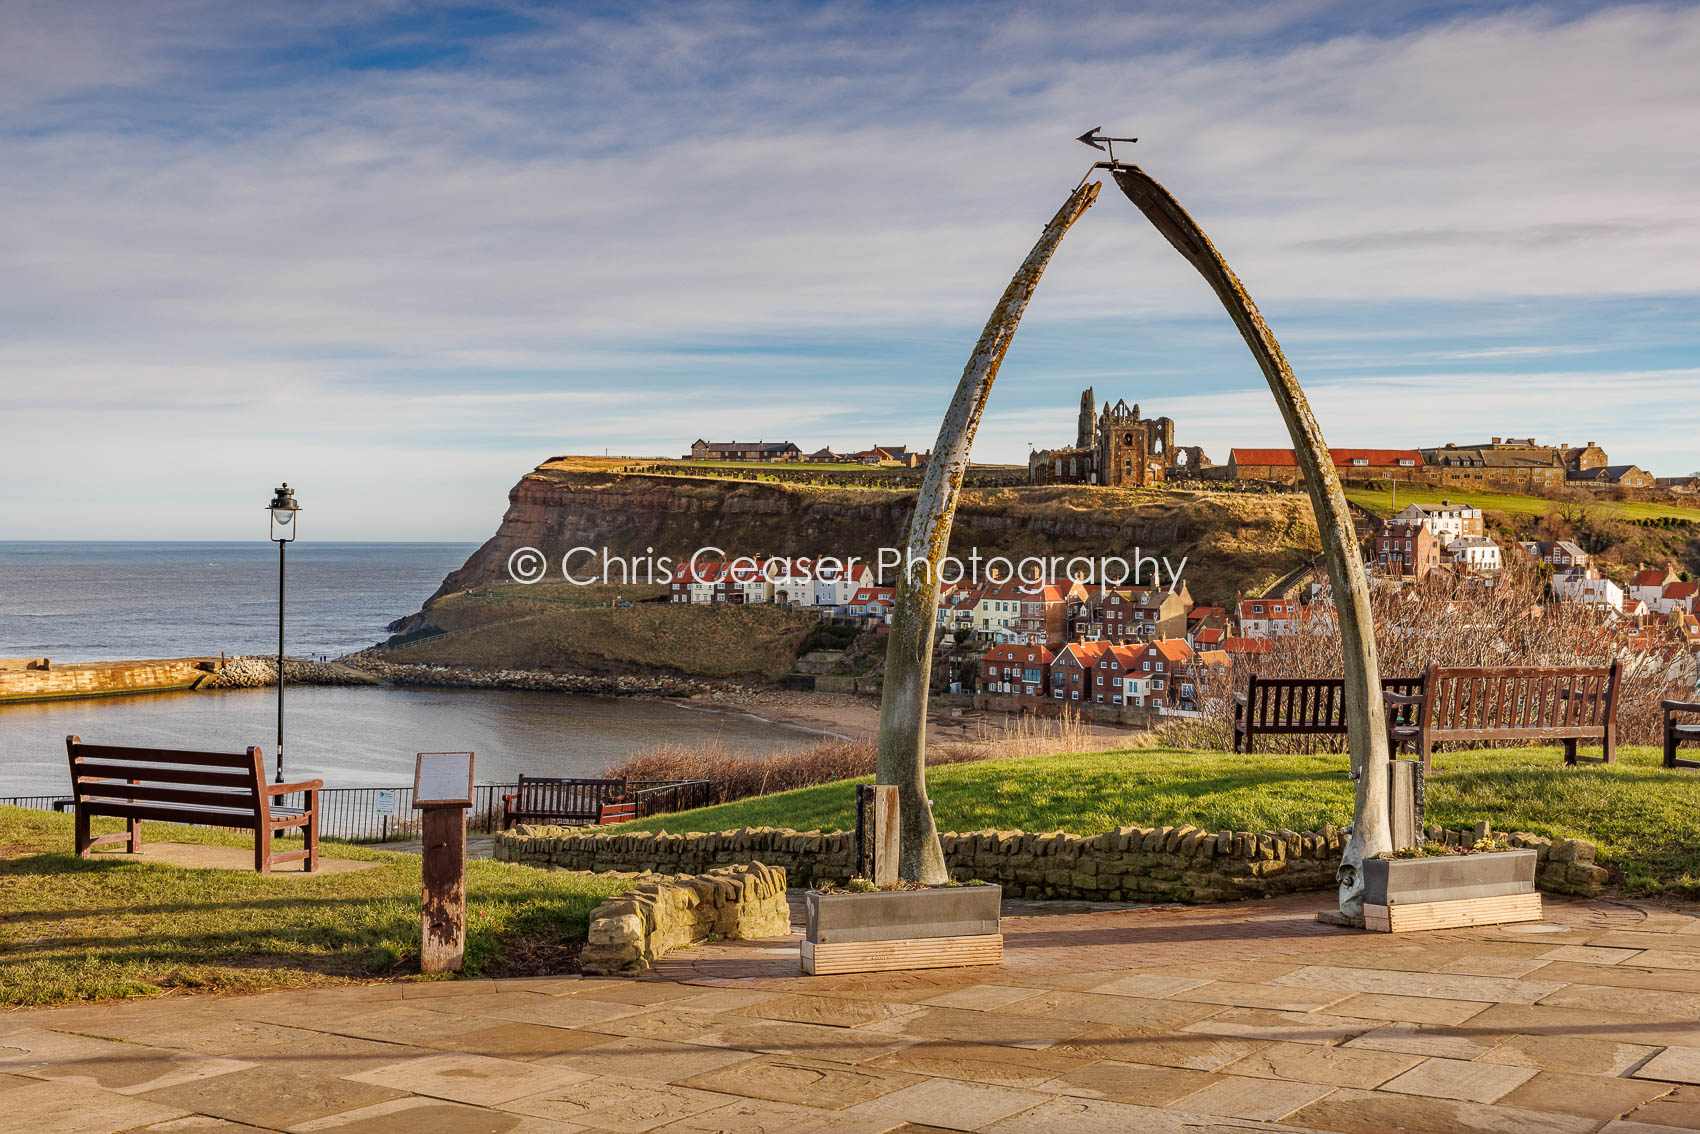 The Whale Bones, Whitby